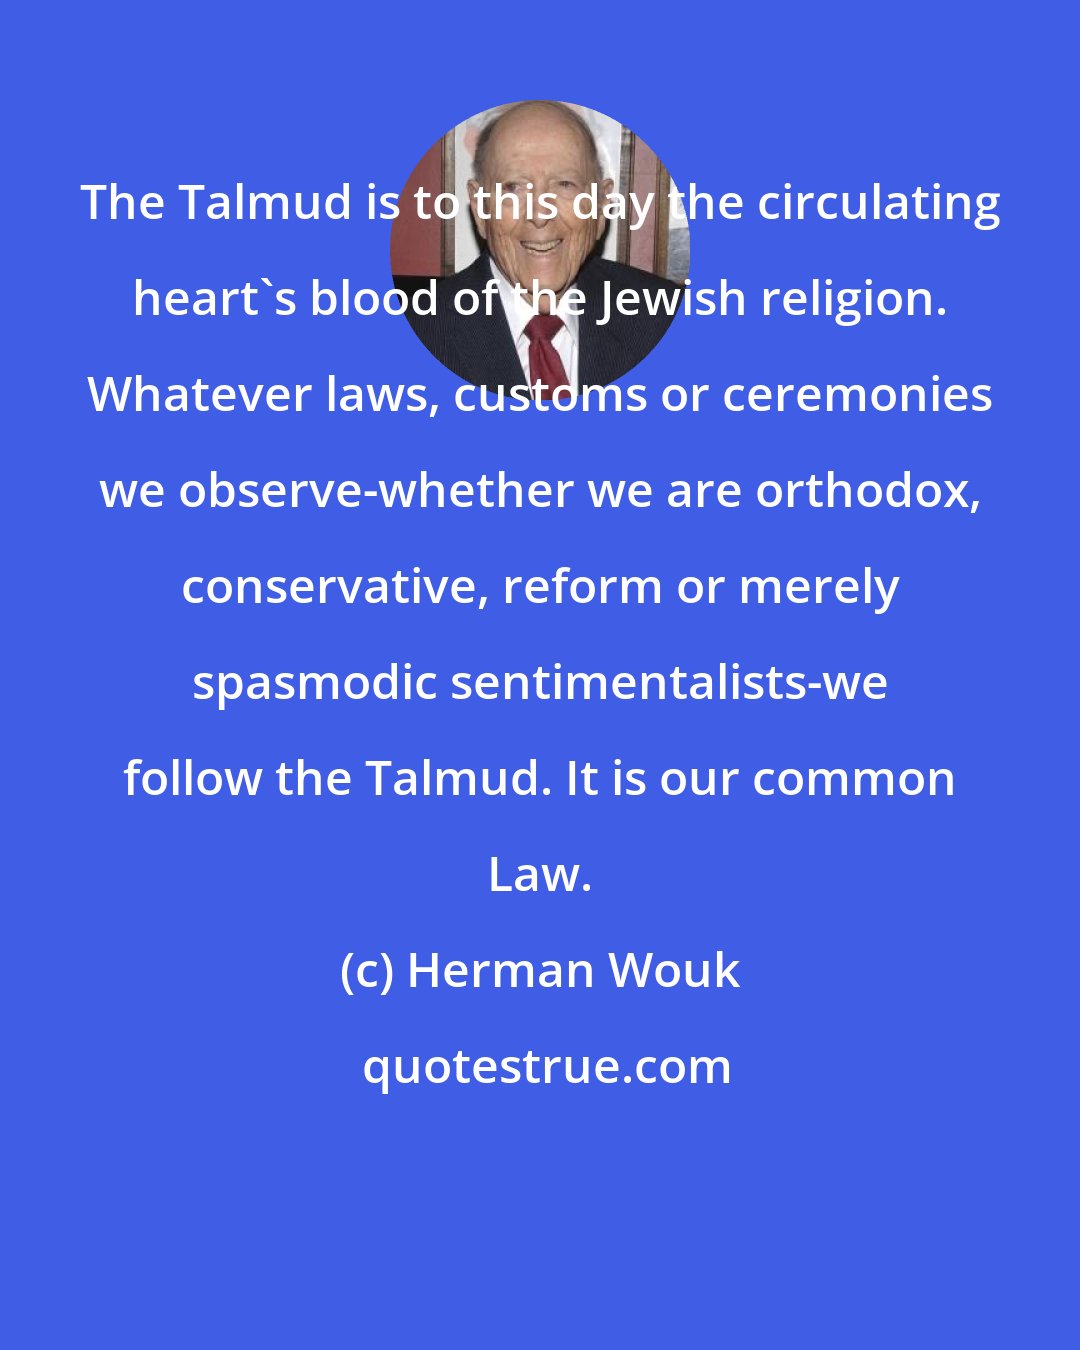 Herman Wouk: The Talmud is to this day the circulating heart's blood of the Jewish religion. Whatever laws, customs or ceremonies we observe-whether we are orthodox, conservative, reform or merely spasmodic sentimentalists-we follow the Talmud. It is our common Law.